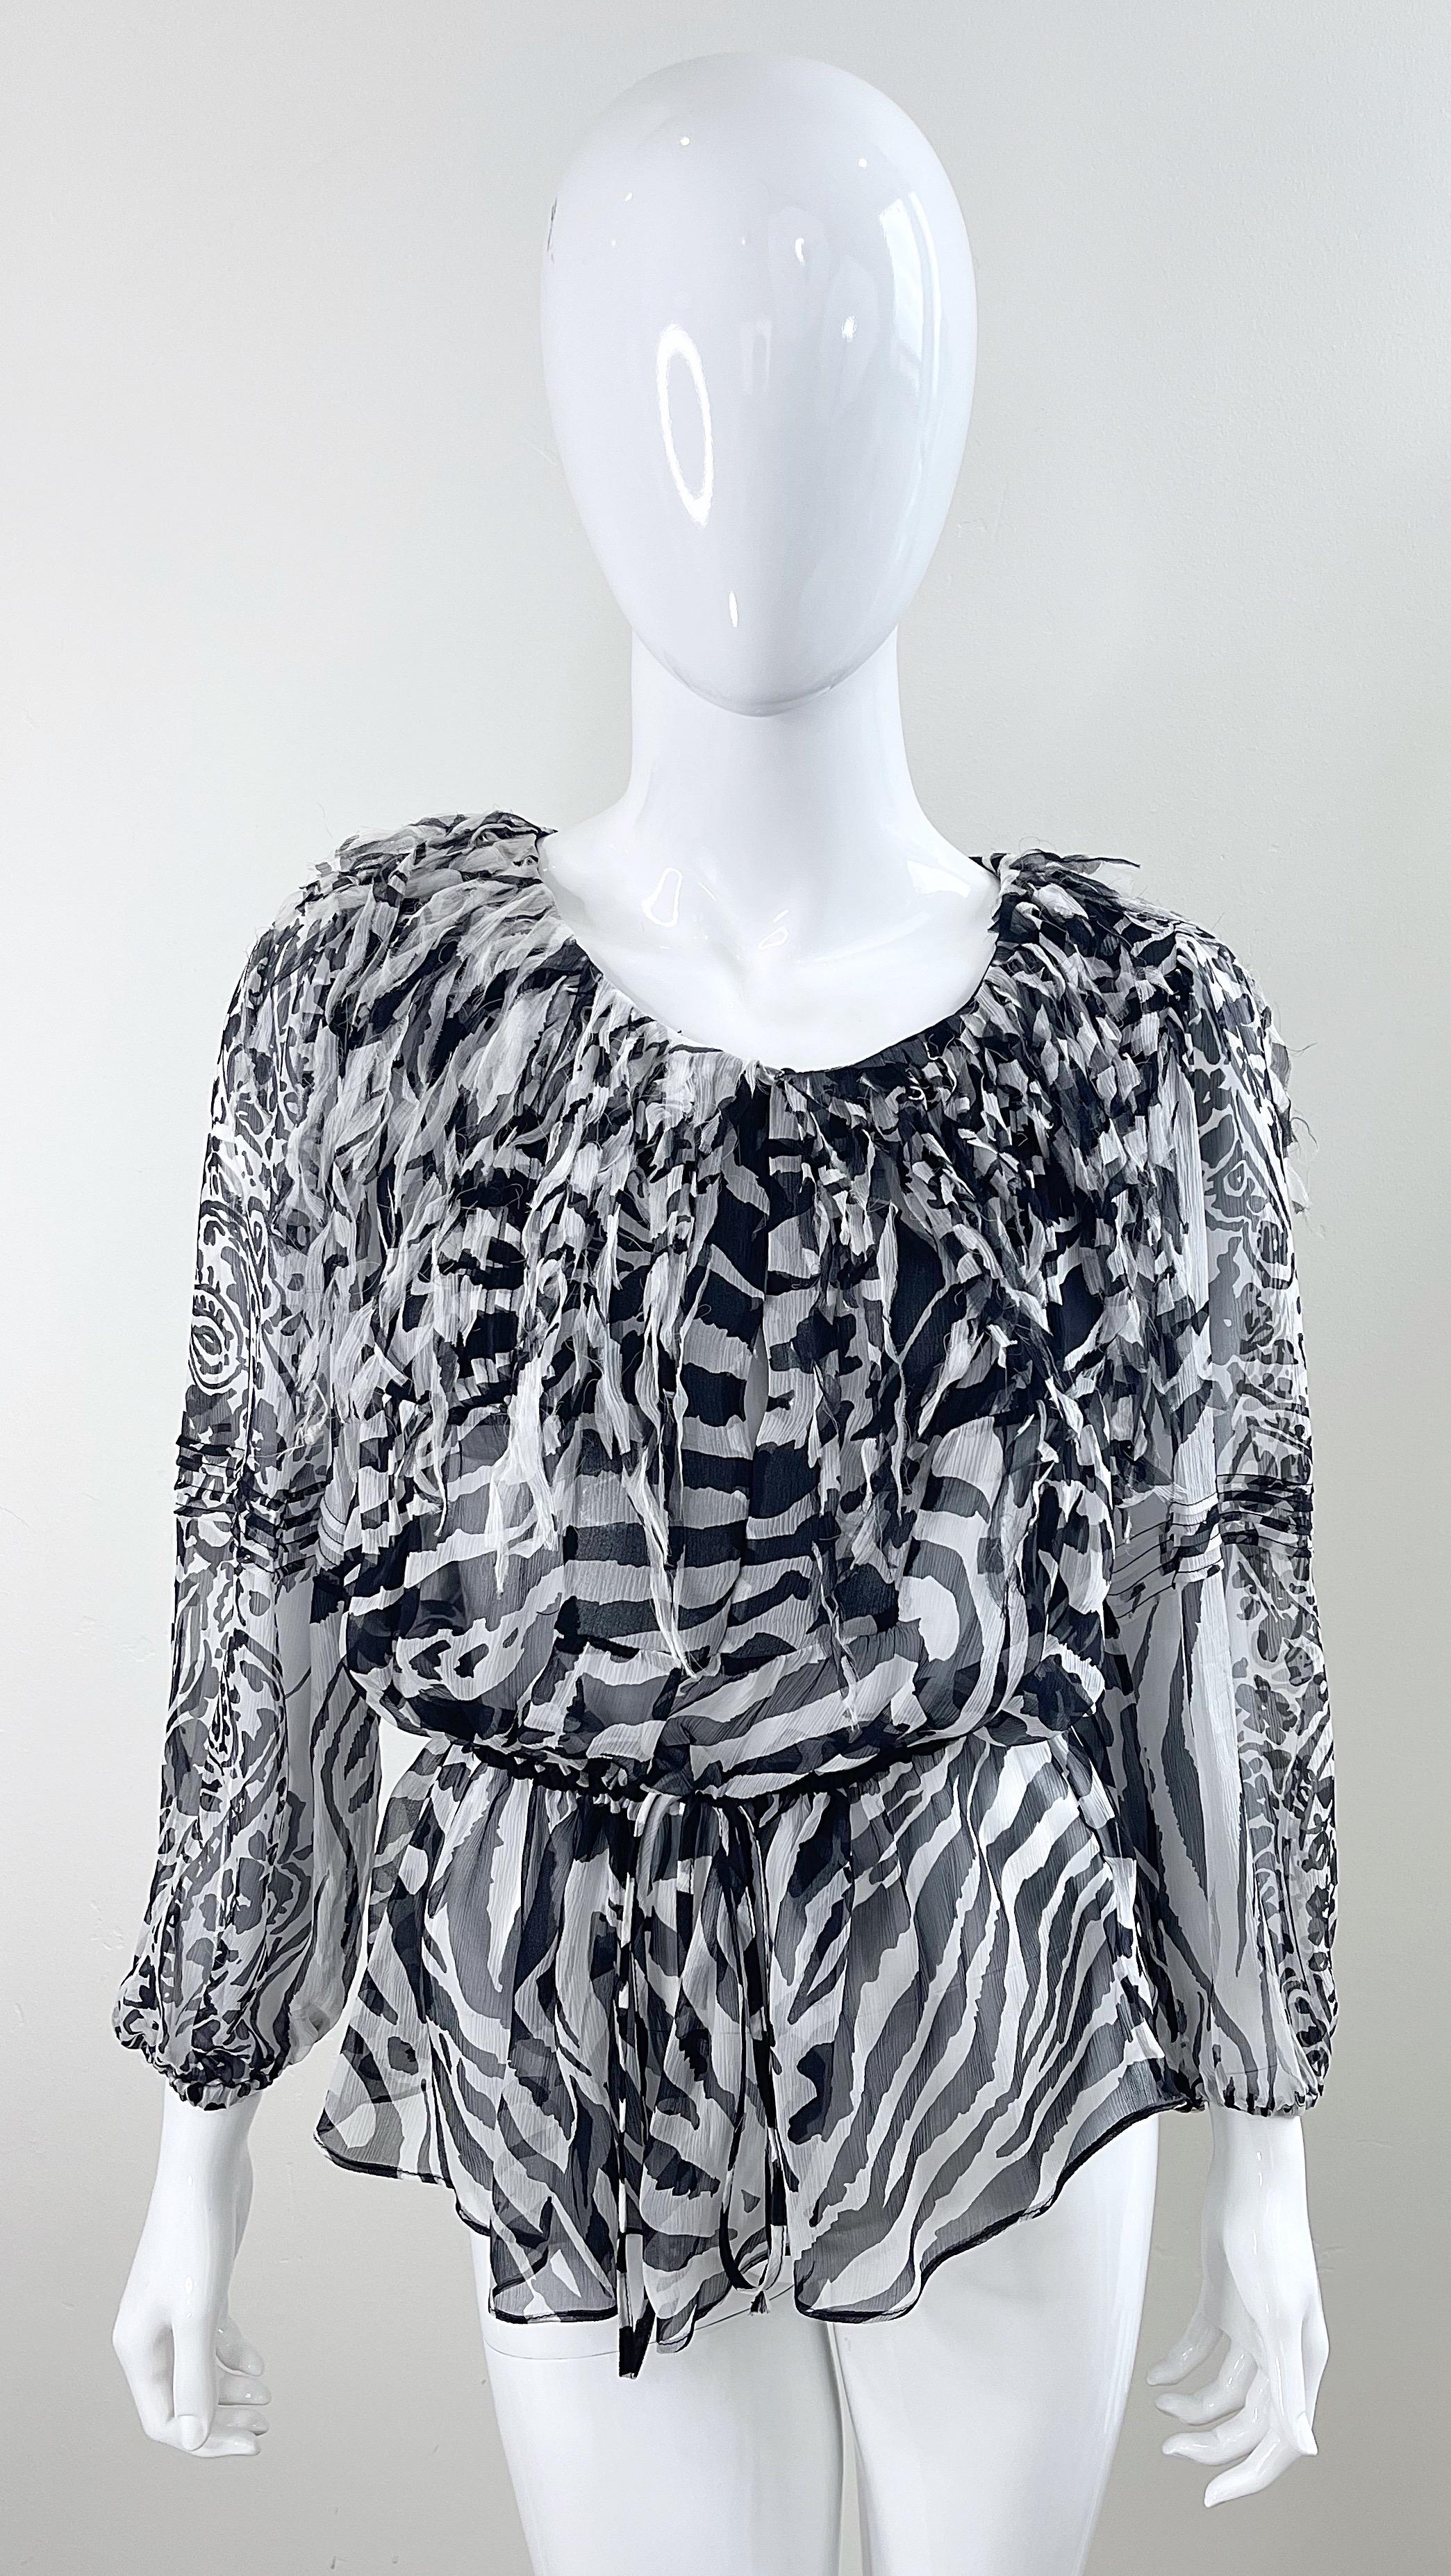 Blumarine Fall 2010 Zebra Print Black and White Fringe Silk Chiffon Blouse Top In Excellent Condition For Sale In San Diego, CA